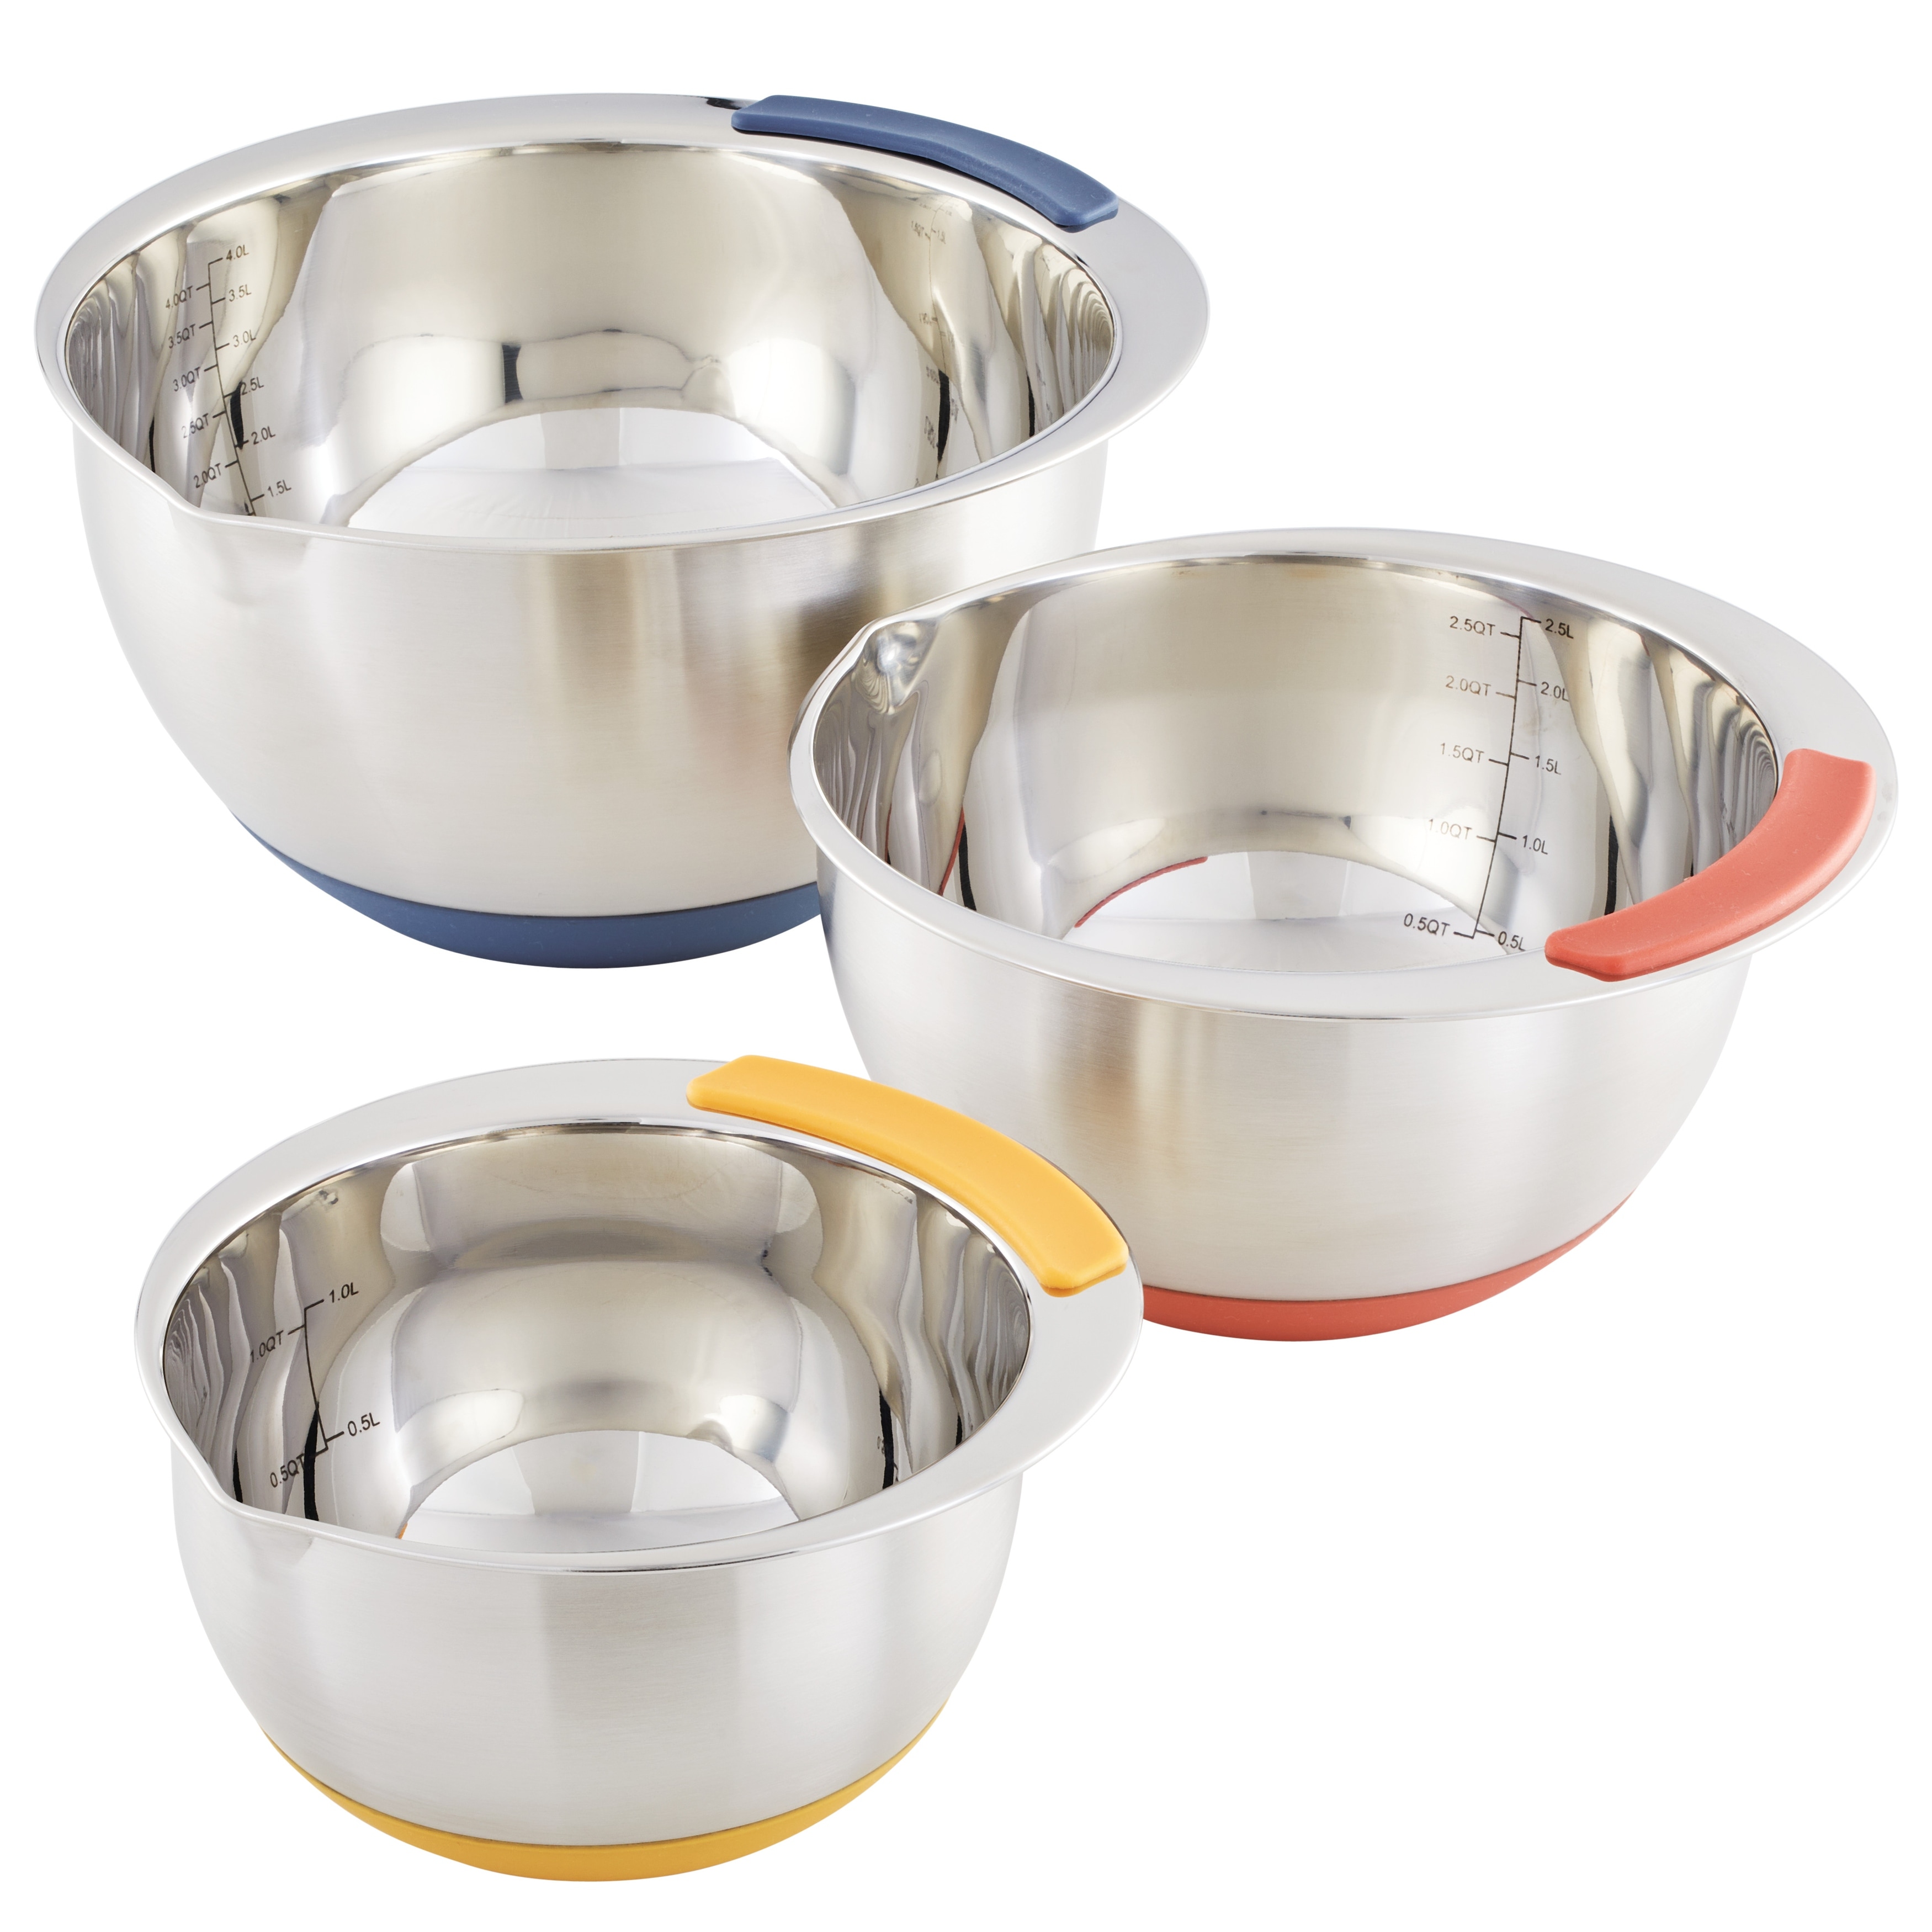 https://ak1.ostkcdn.com/images/products/is/images/direct/97206e774e040ddd1ff53a4e28b0695bd2c6ca6b/Ayesha-Curry-Pantryware-Stainless-Steel-Nesting-Mixing-Bowls-Set%2C-3-Piece%2C-Silver-with-Color-Accent-Handles.jpg